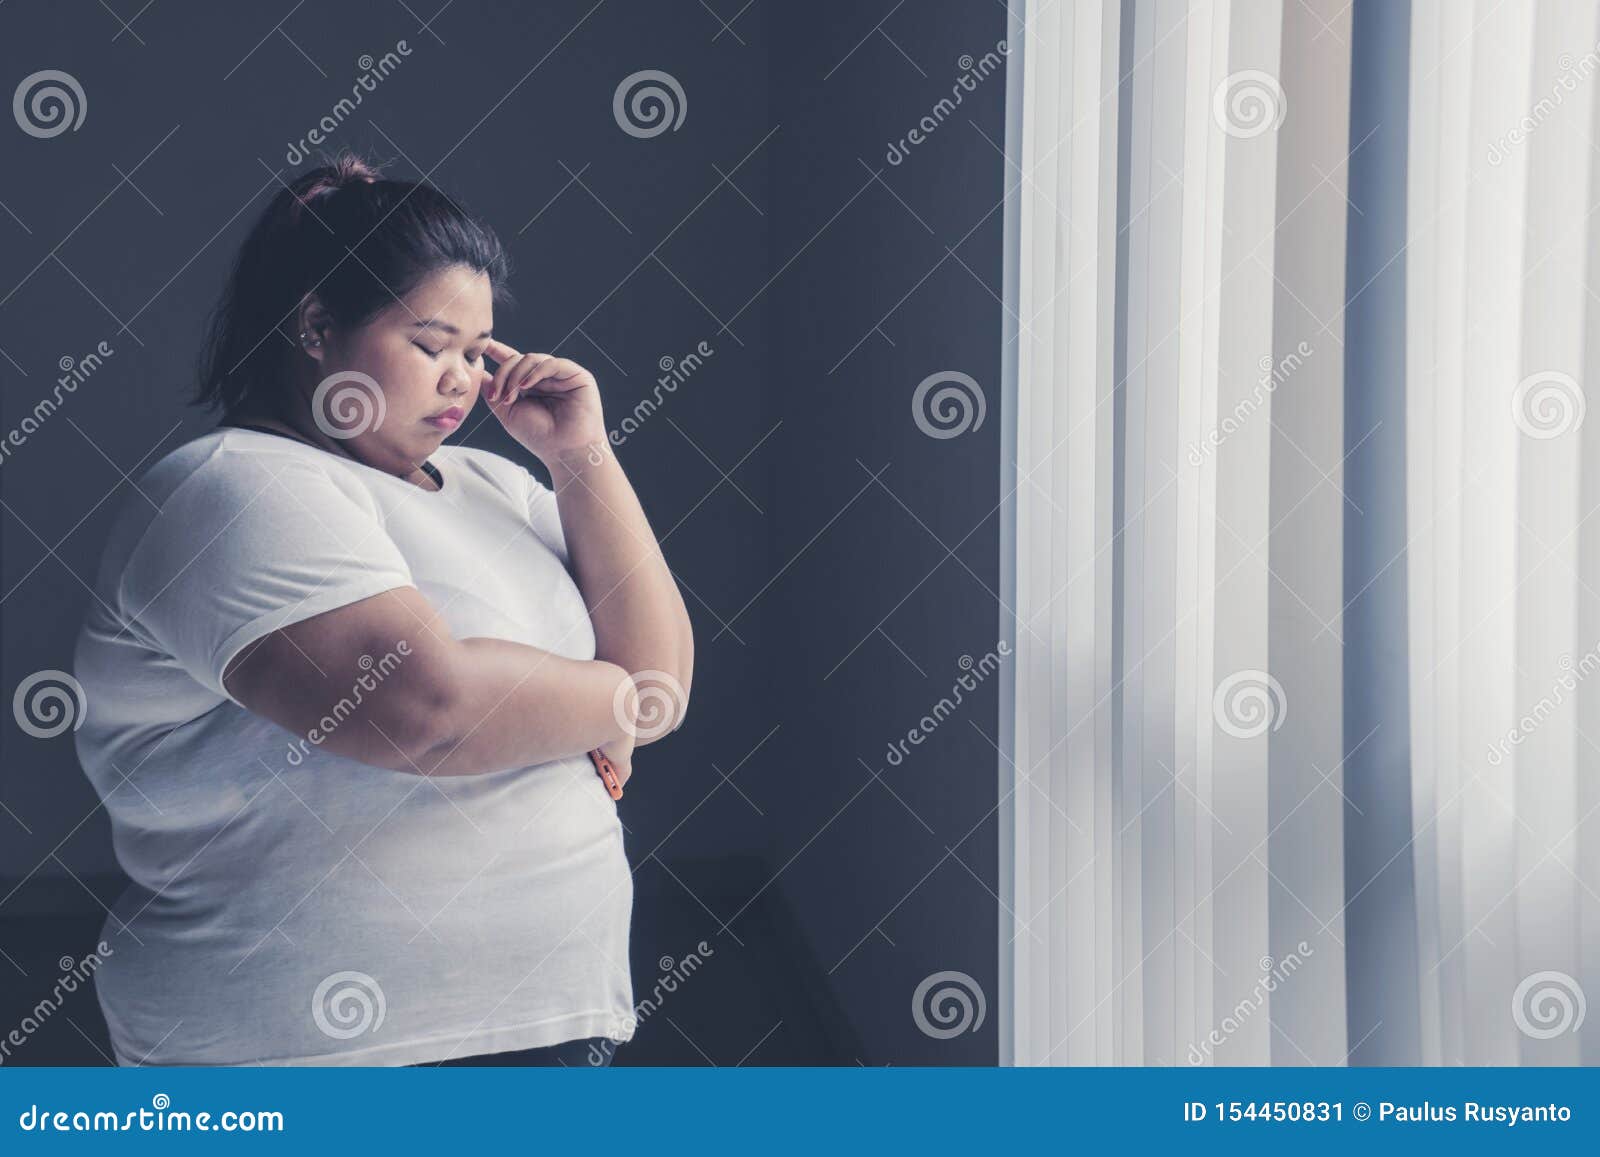 obese woman thinking something near the window